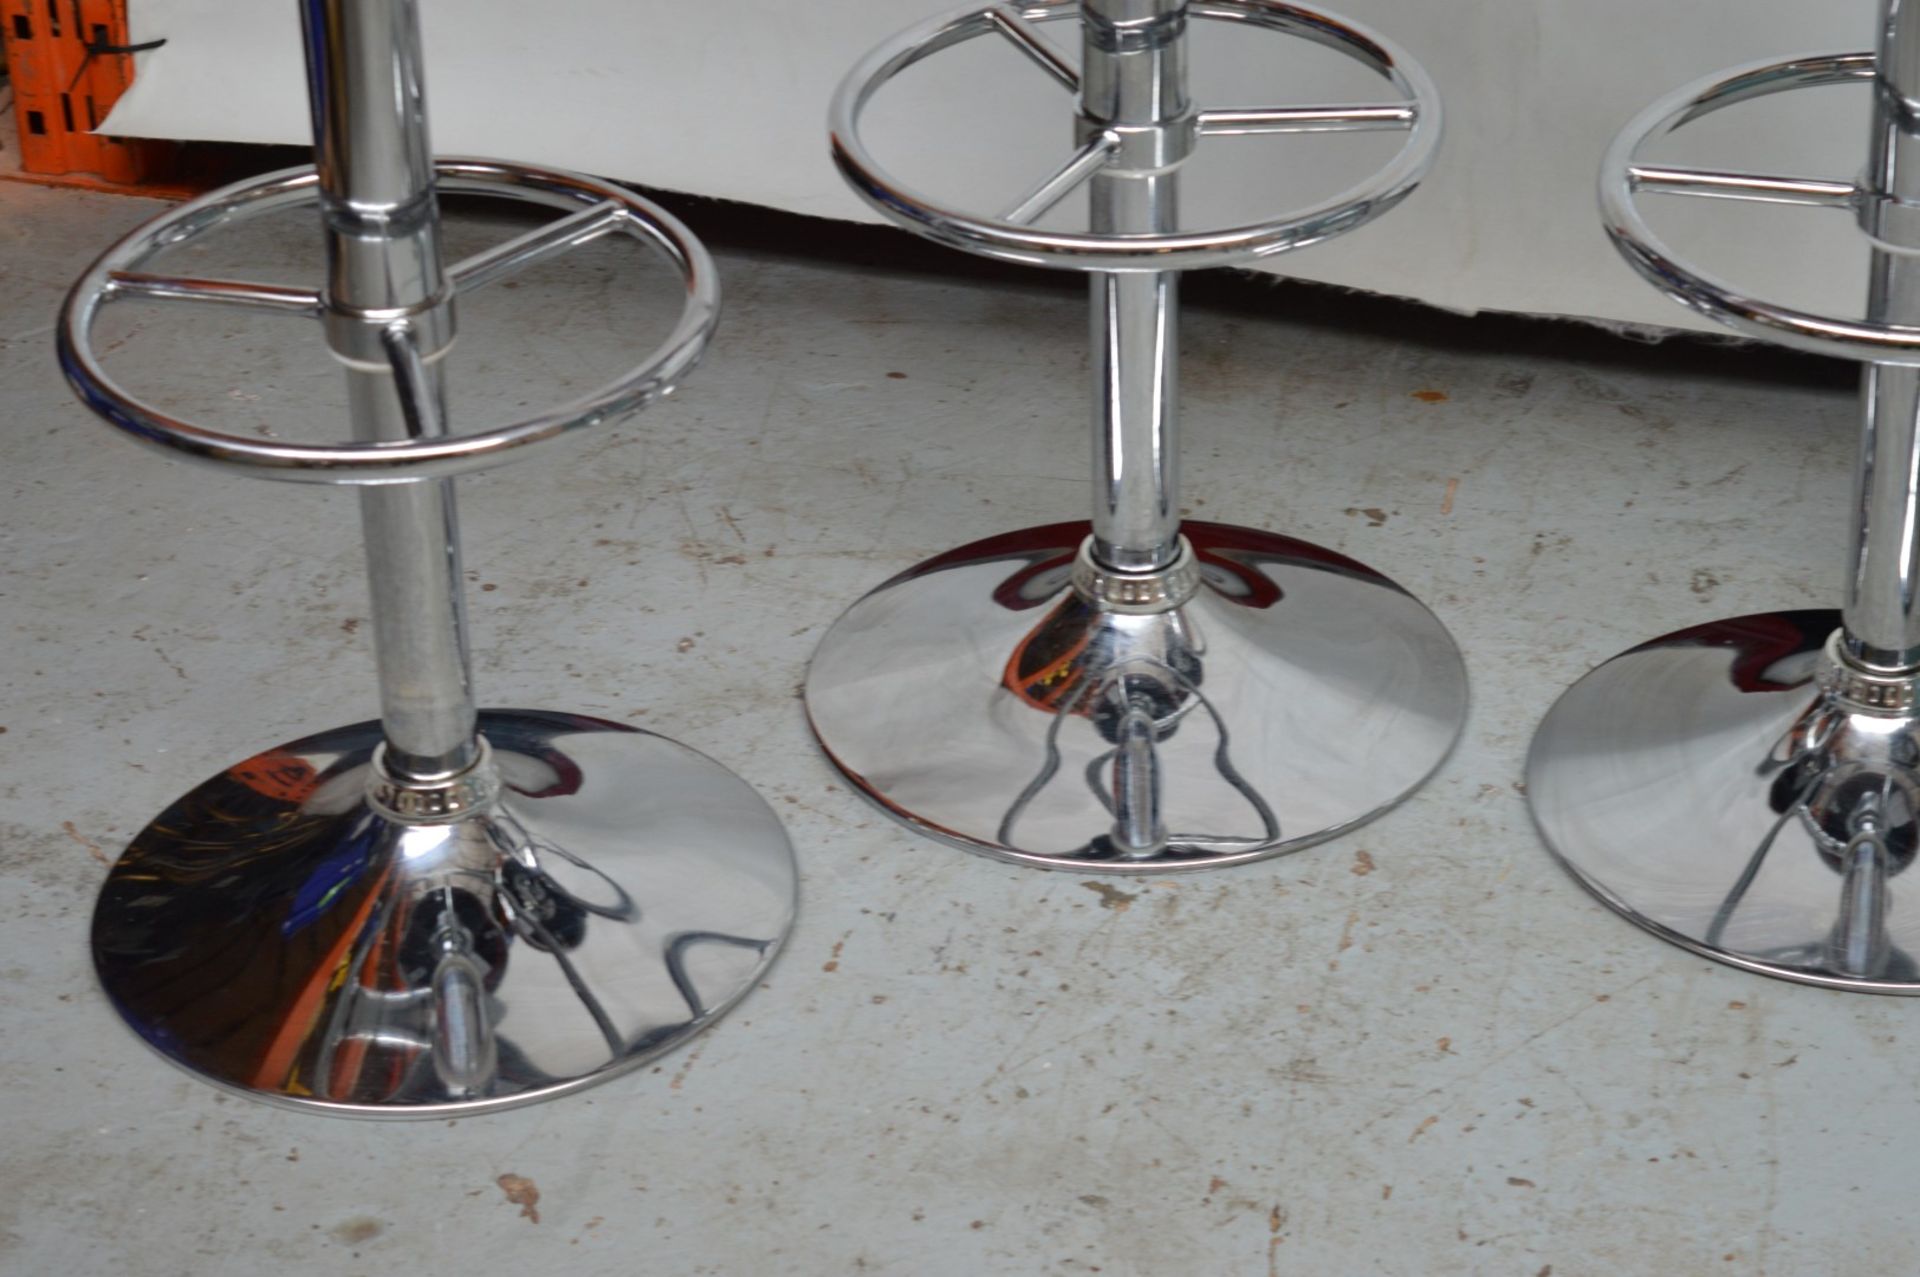 4 x Retro American Roadside Diner Themed Gas Lift Bar Stools - CL164 - Fantastic Stools With Full - Image 4 of 14